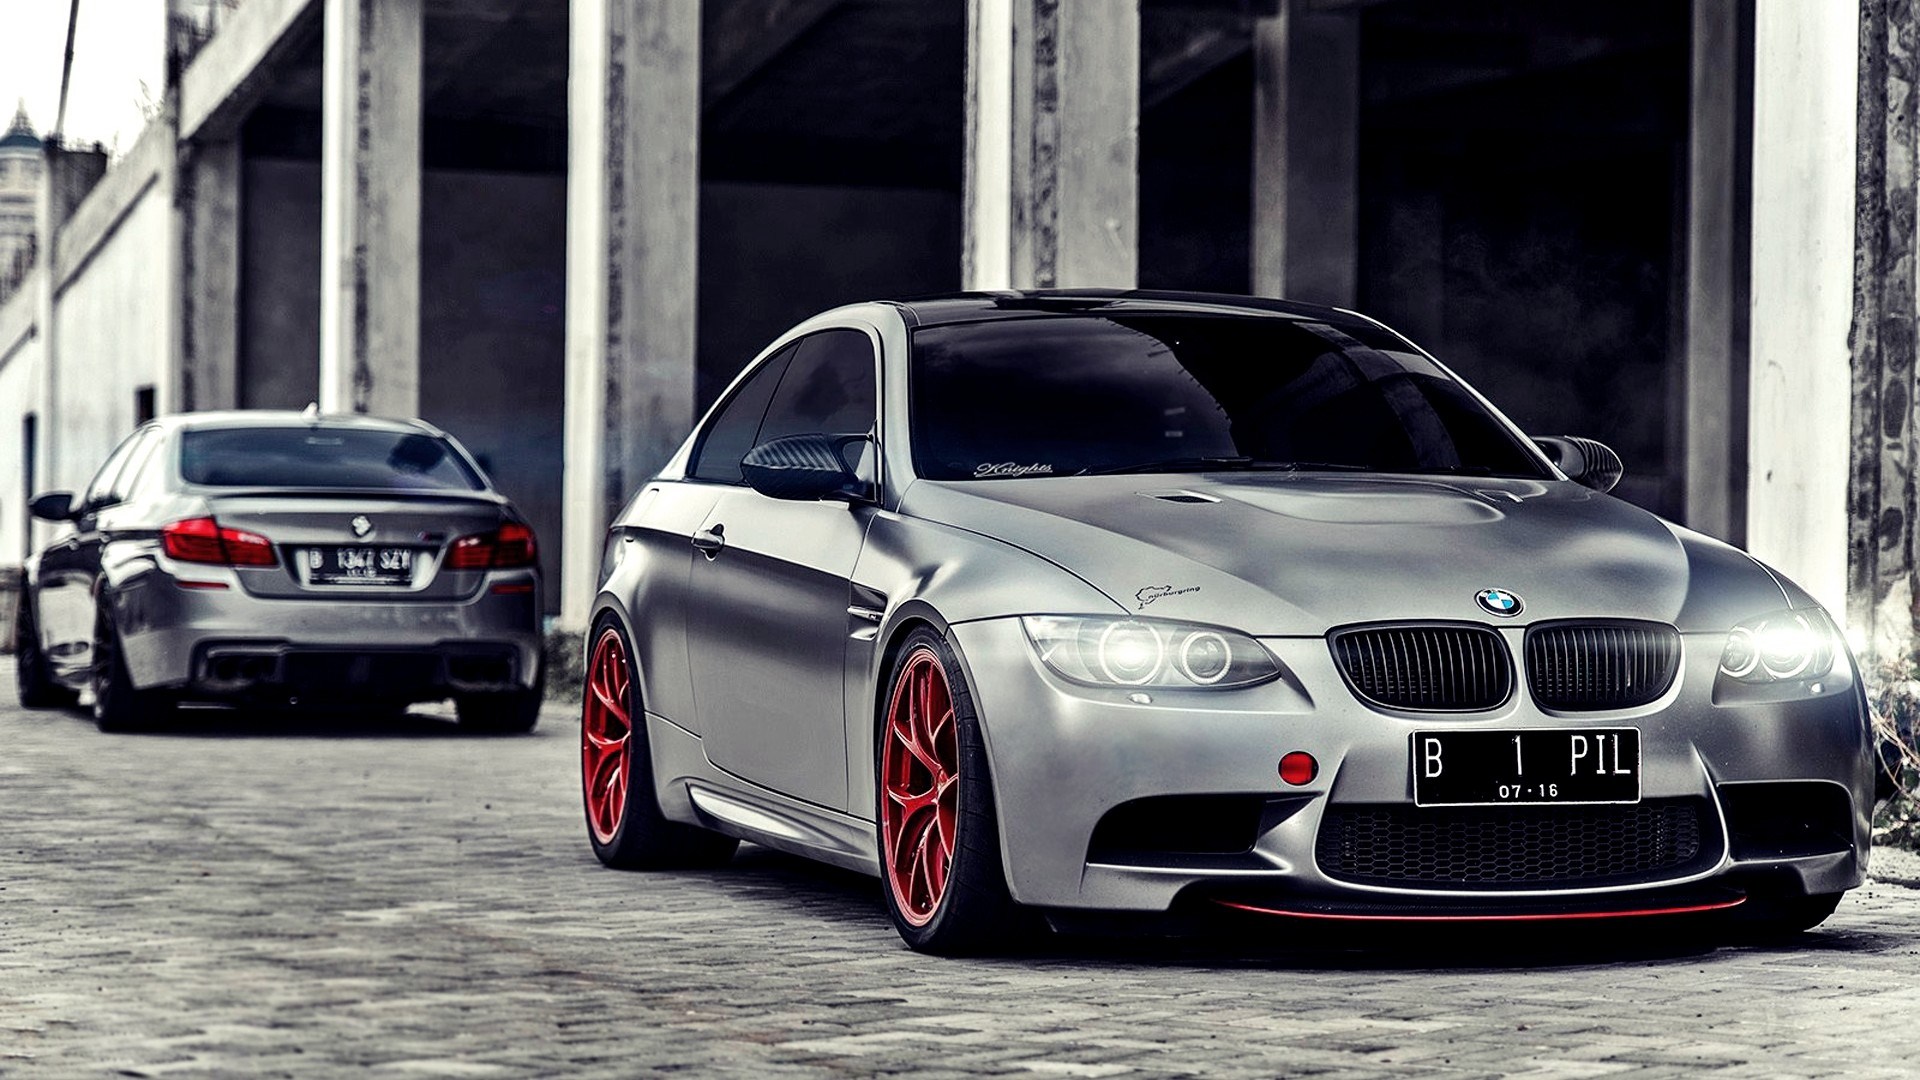 BMW M5 F10M and BMW M3 E92